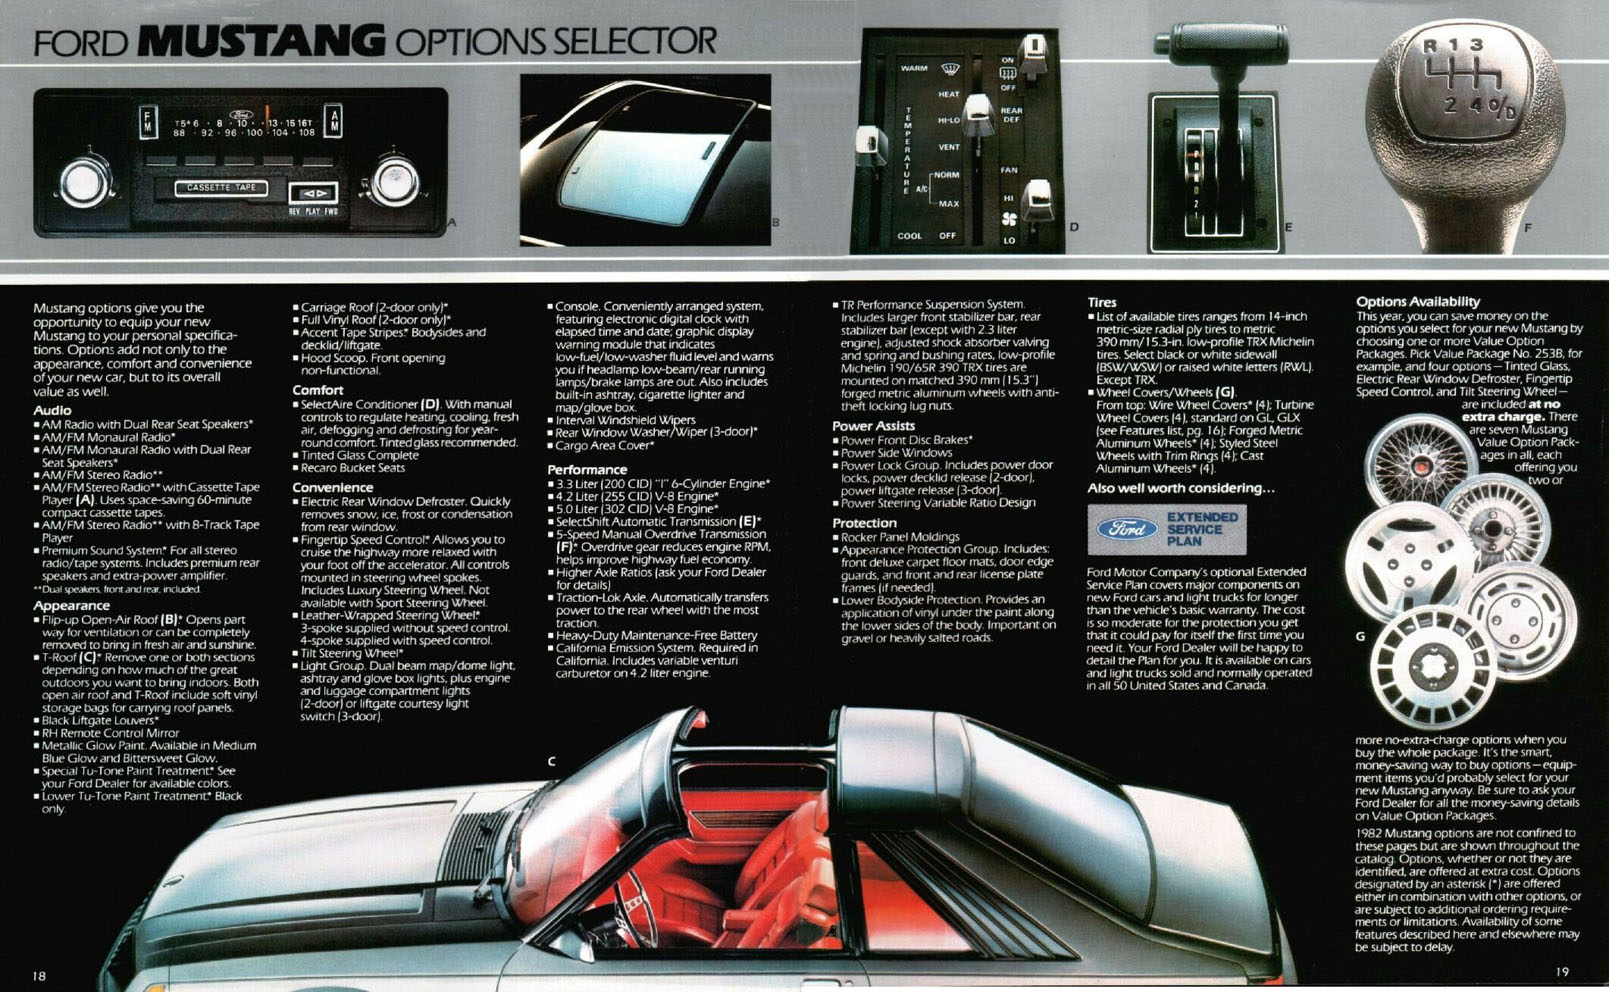 1982 Ford Mustang Brochure Page 10